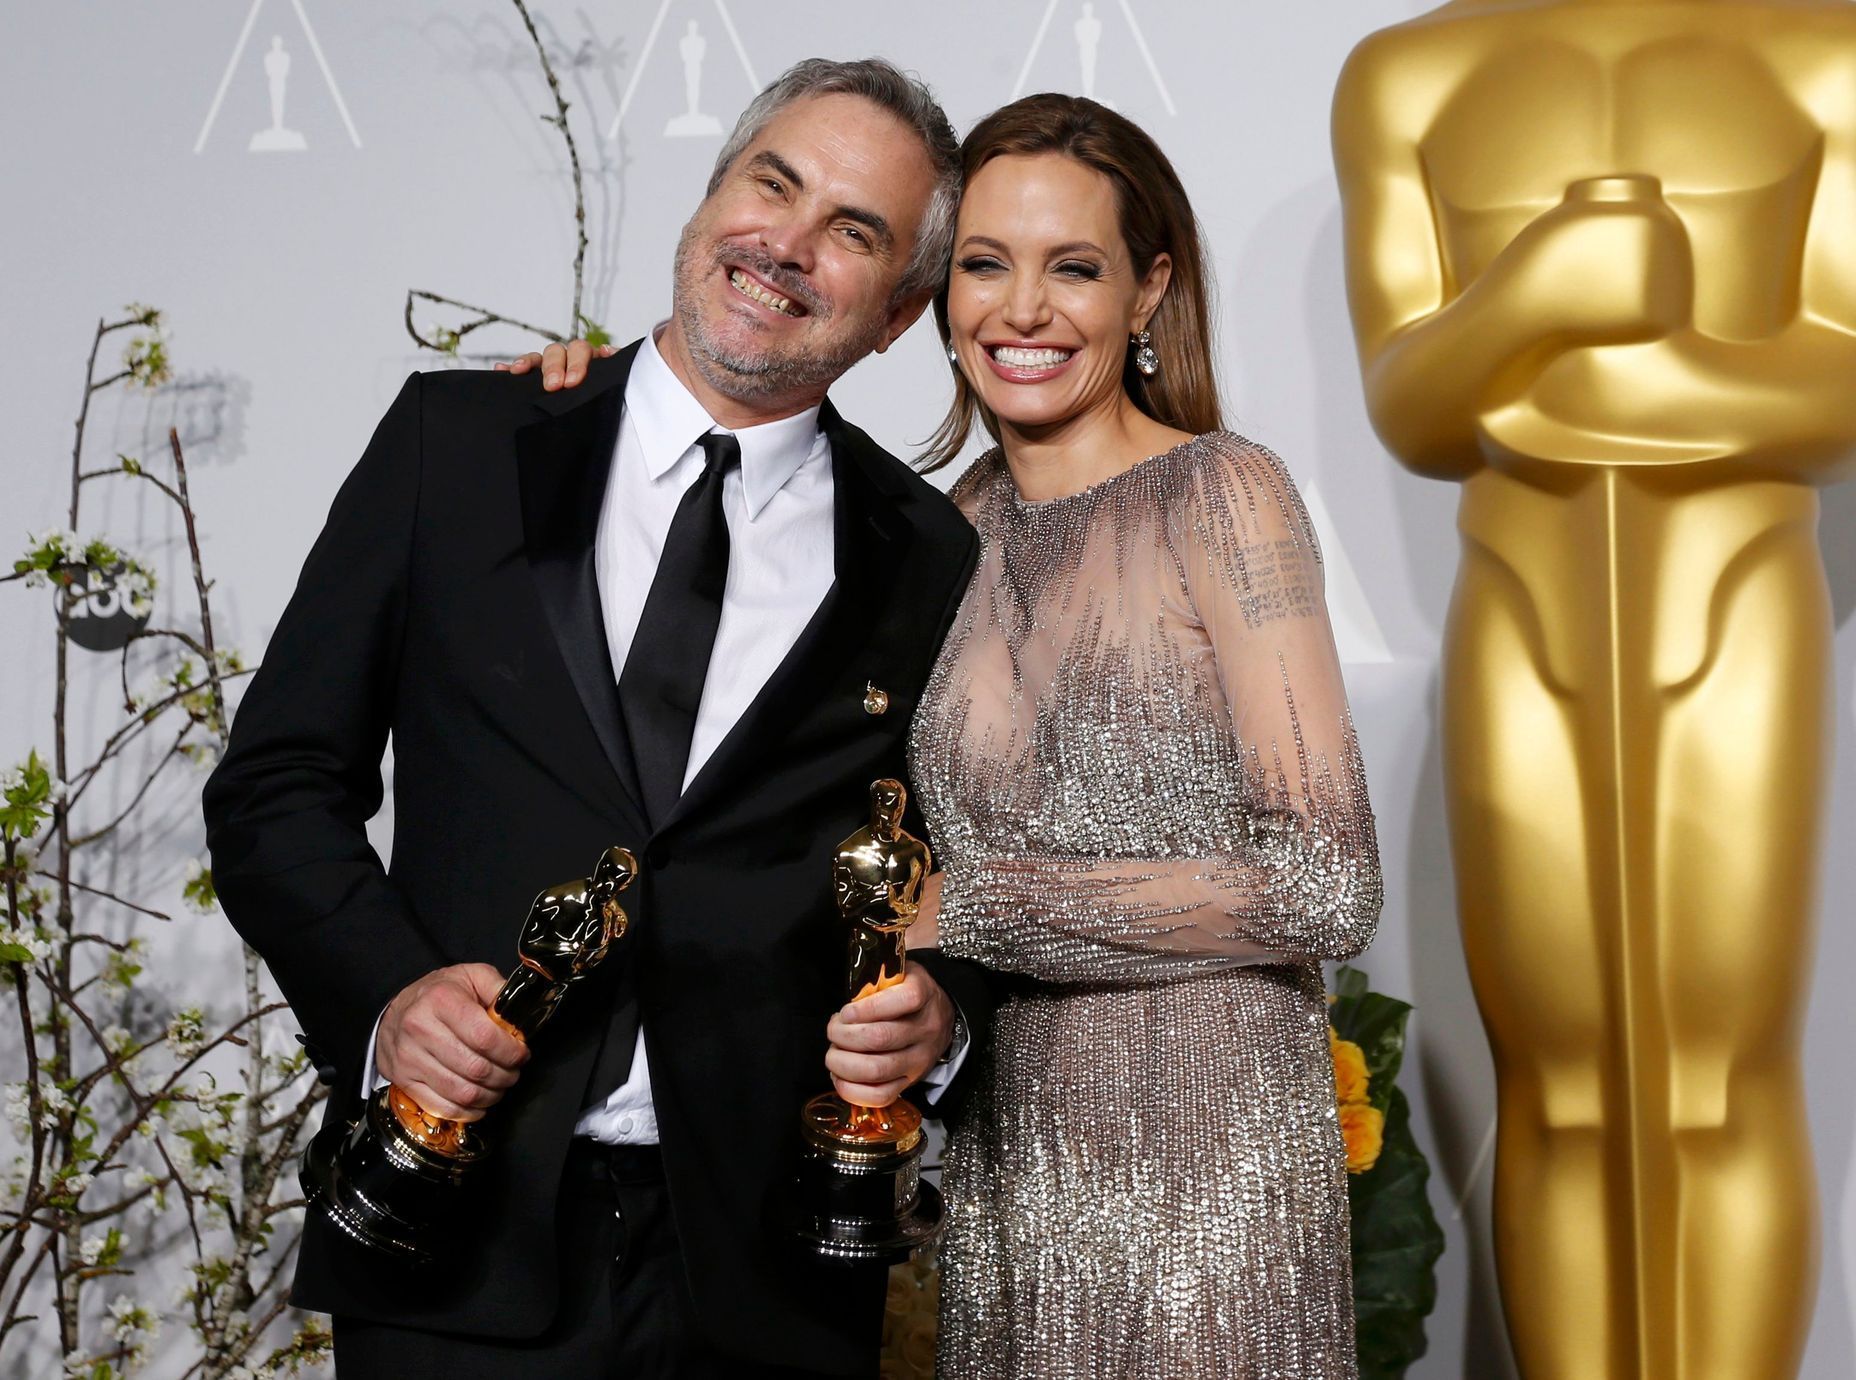 Cuaron poses with the Oscars for best director and for best film editing for &quot;Gravity&quot; with presenter Jolie backstage at the 86th Academy Awards in Hollywood